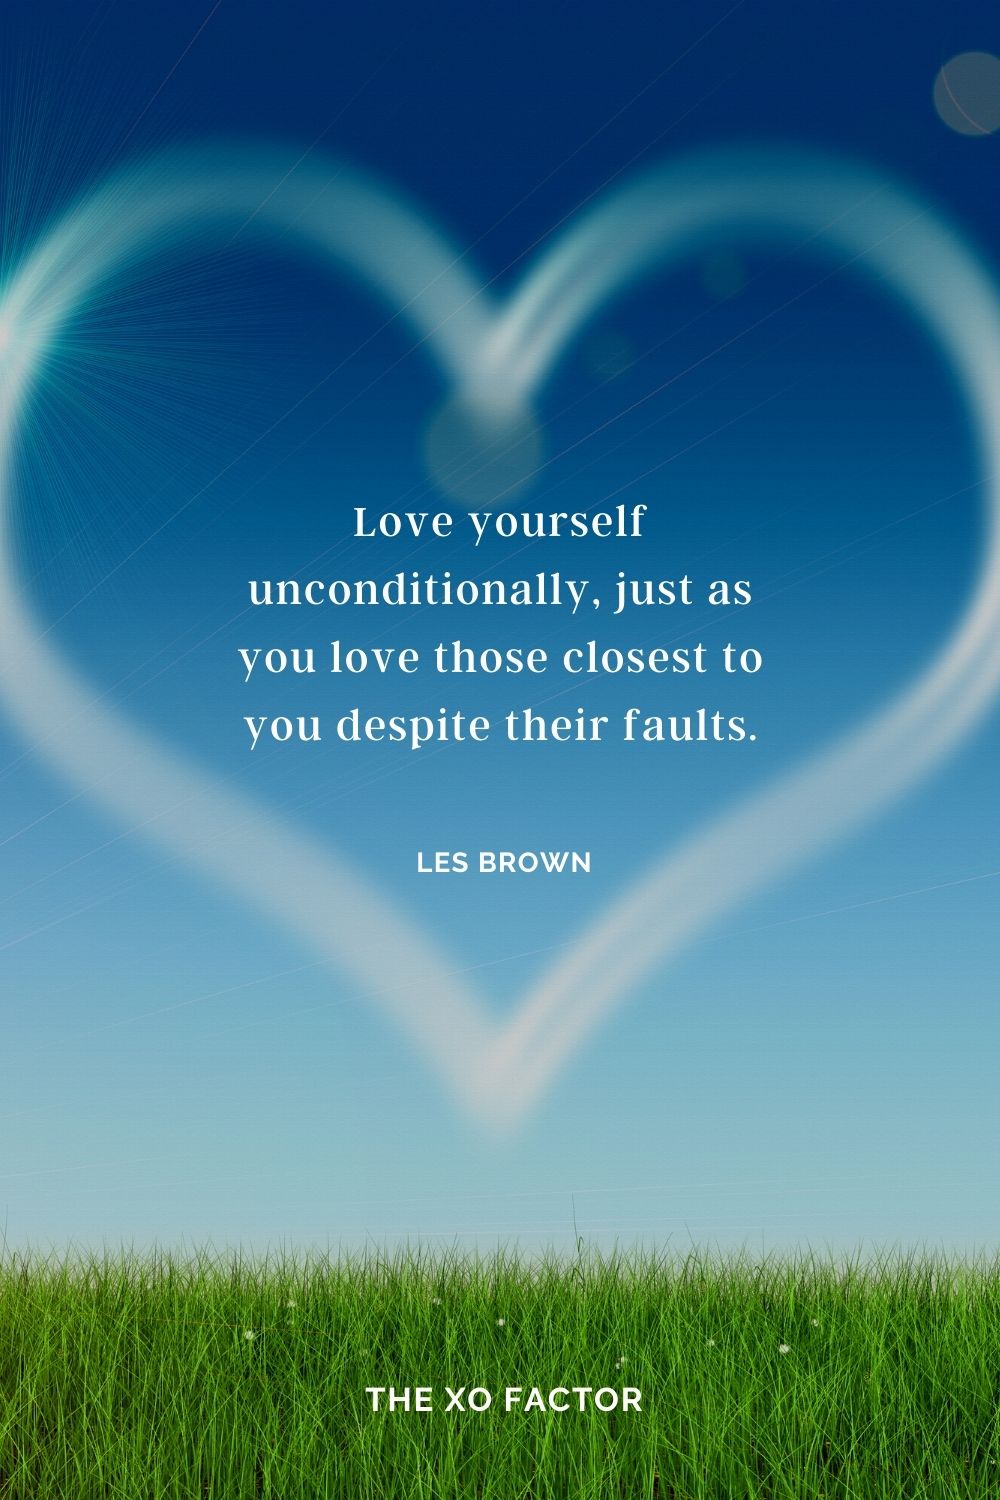 Love yourself unconditionally, just as you love those closest to you despite their faults. Les Brown